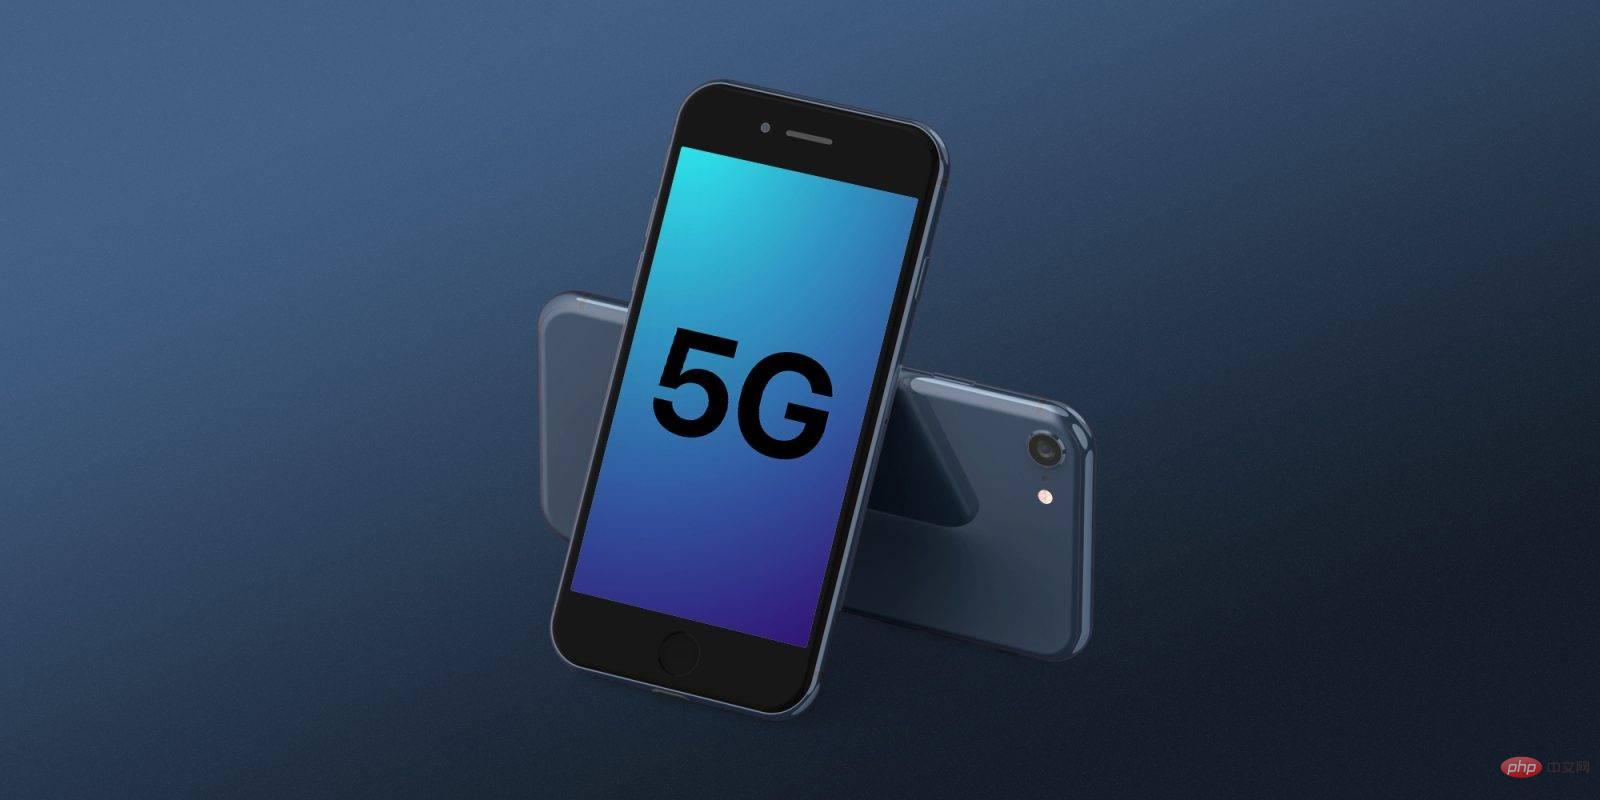 'iPhone SE+ 5G” launched this year, with larger models coming in 2023